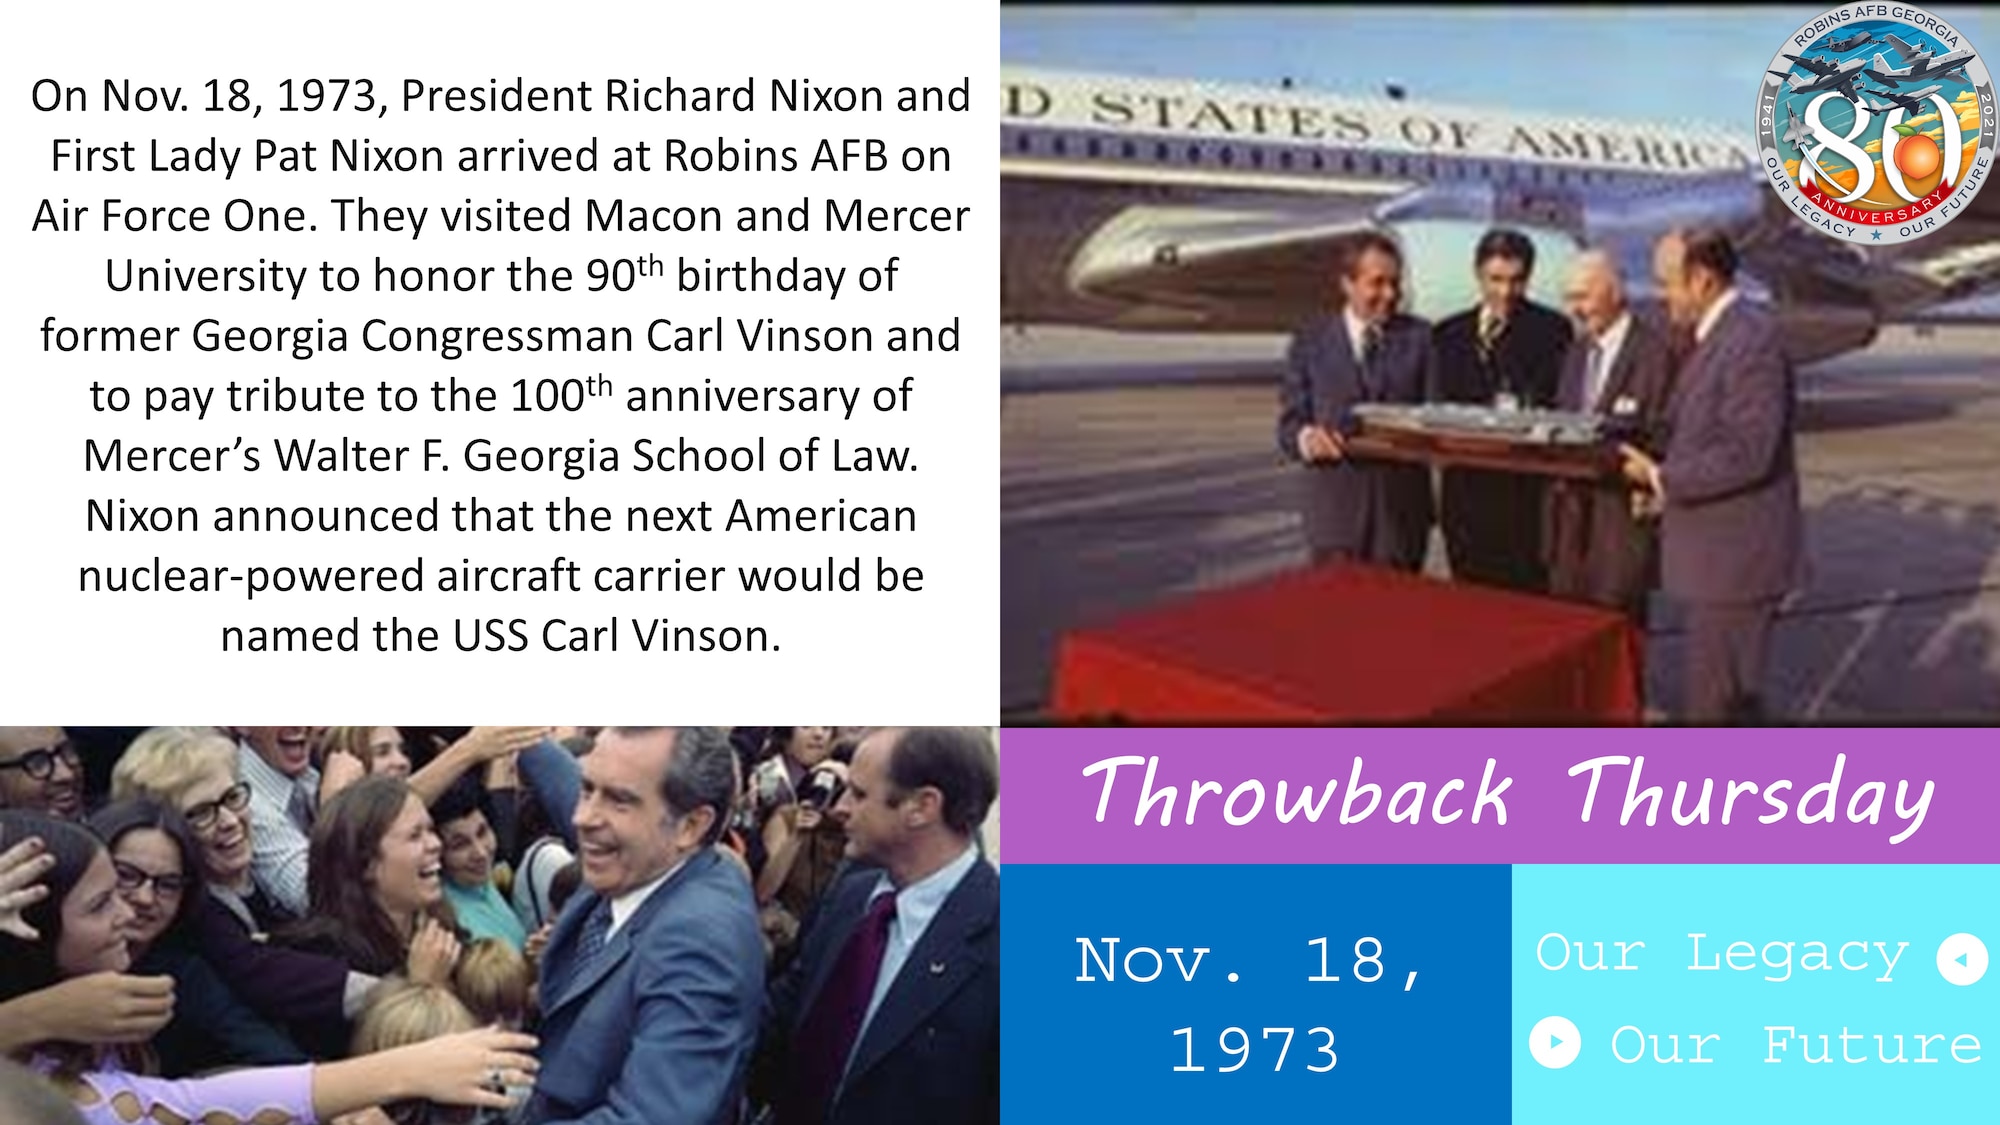 Graphic shows two pictures of Richard Nixon, one in front of Air Force One and one greeting the crowd